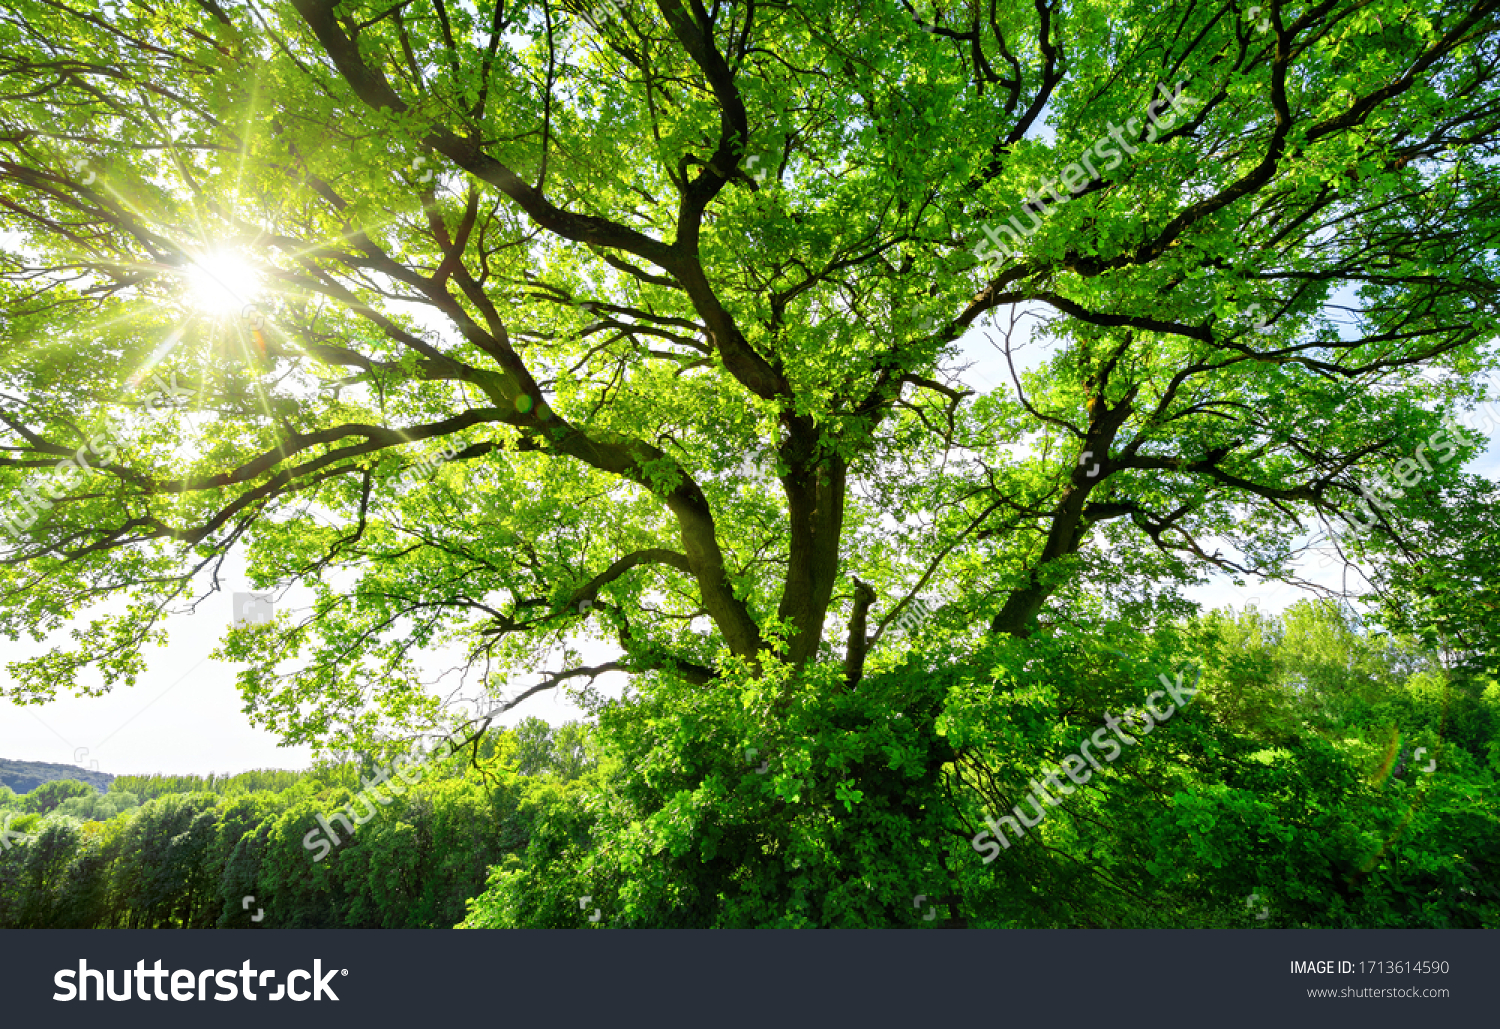 The sun brightly shines through the crooked branches of a majestic green tree #1713614590